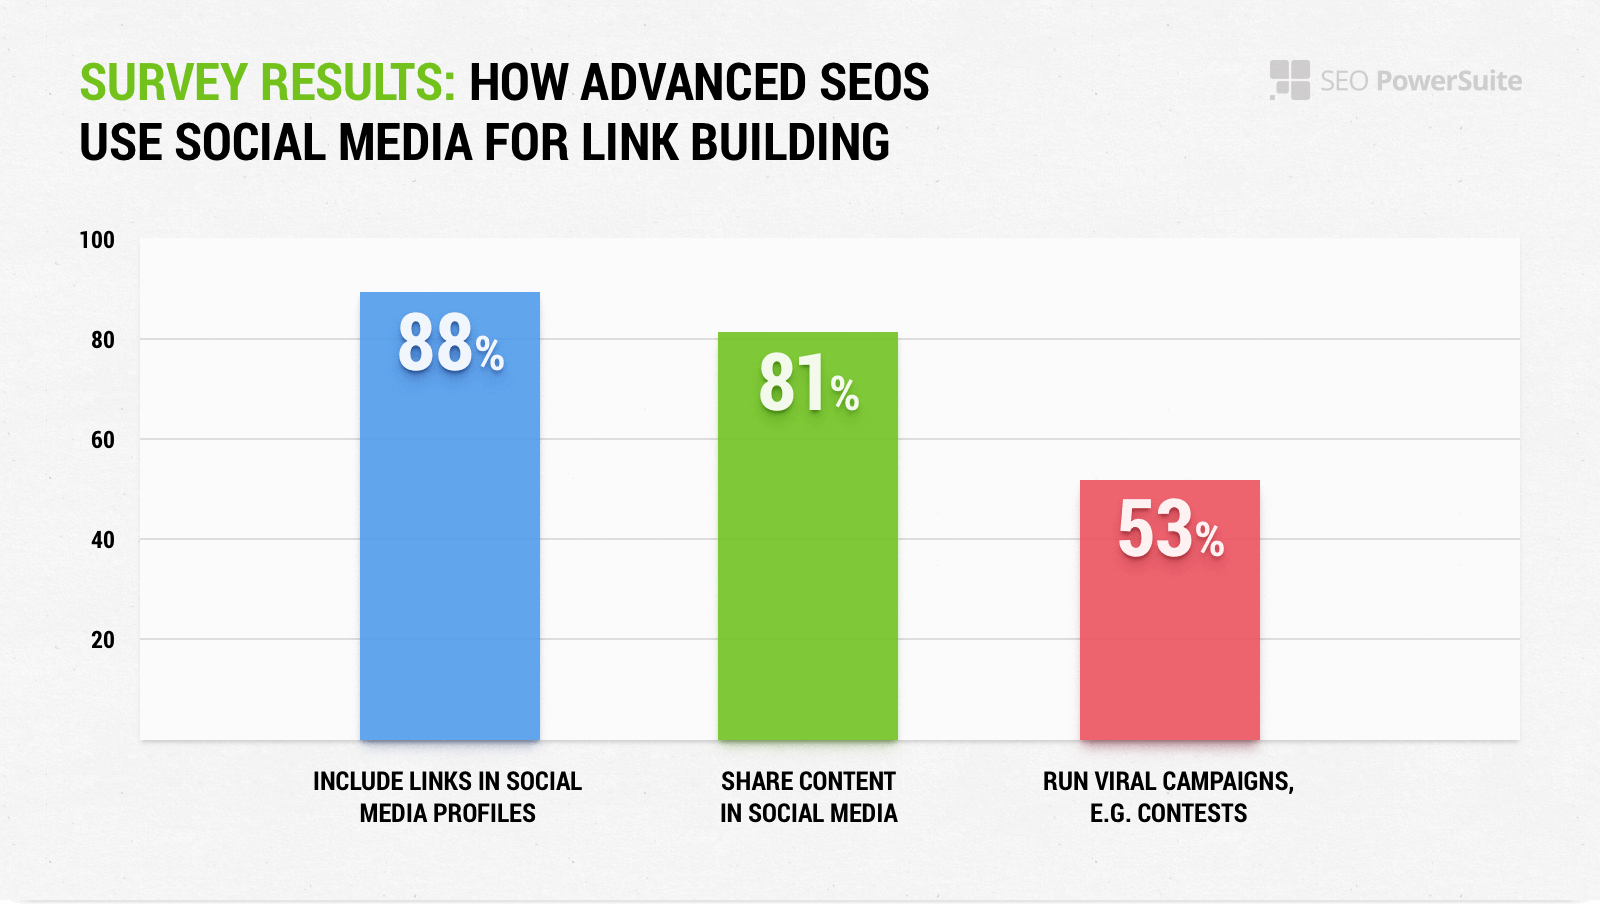 Survey Results: How Advanced SEOs Use Social Media for Link Building